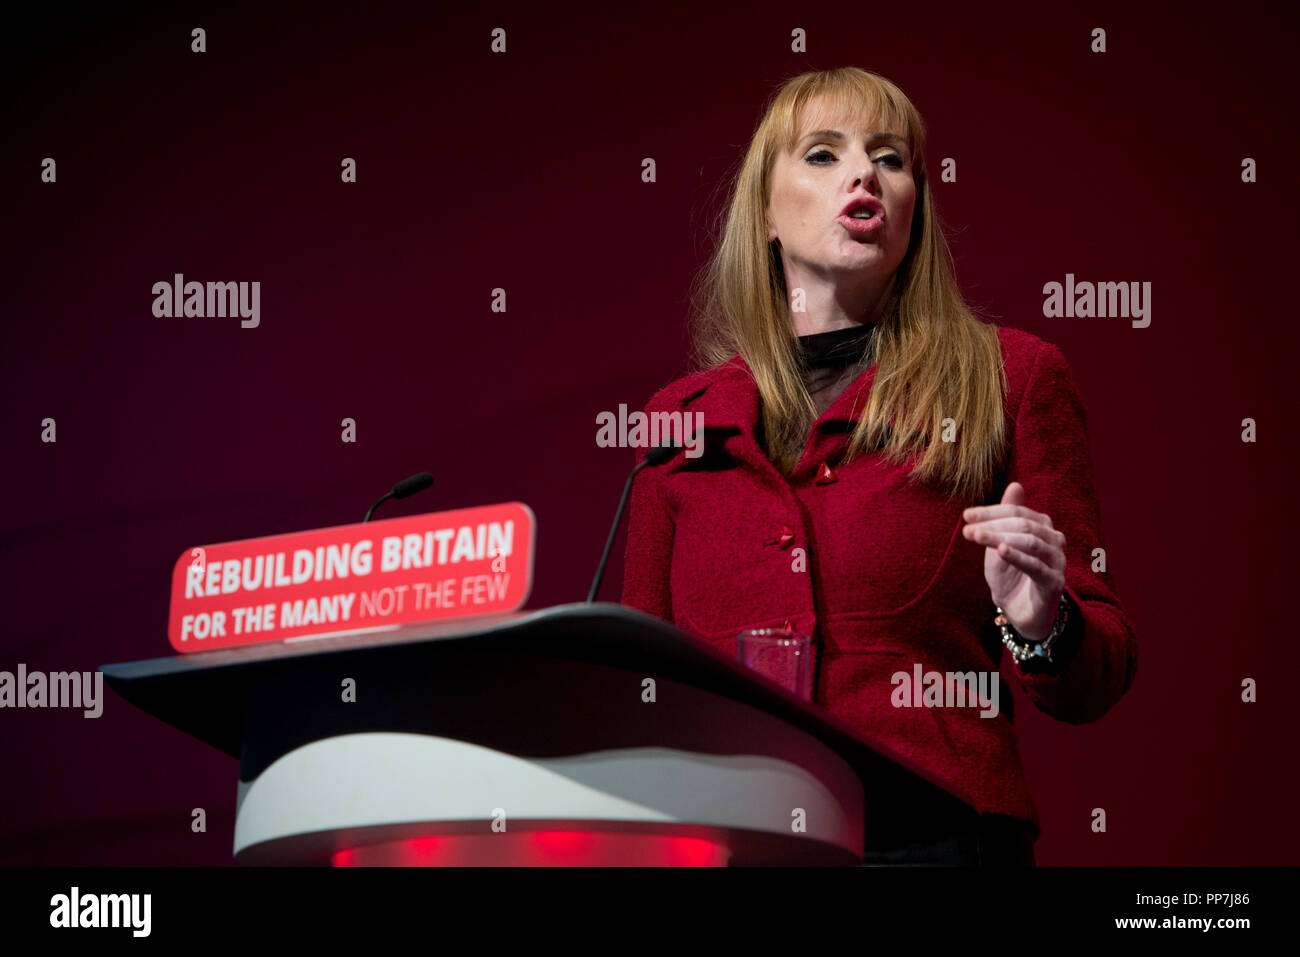 Liverpool, UK. 24th September 2018. Angela Rayner, Shadow Secretary of State for Education, and Labour MP for Ashton-under-Lyne speaks at the Labour Party Conference in Liverpool. © Russell Hart/Alamy Live News. Stock Photo